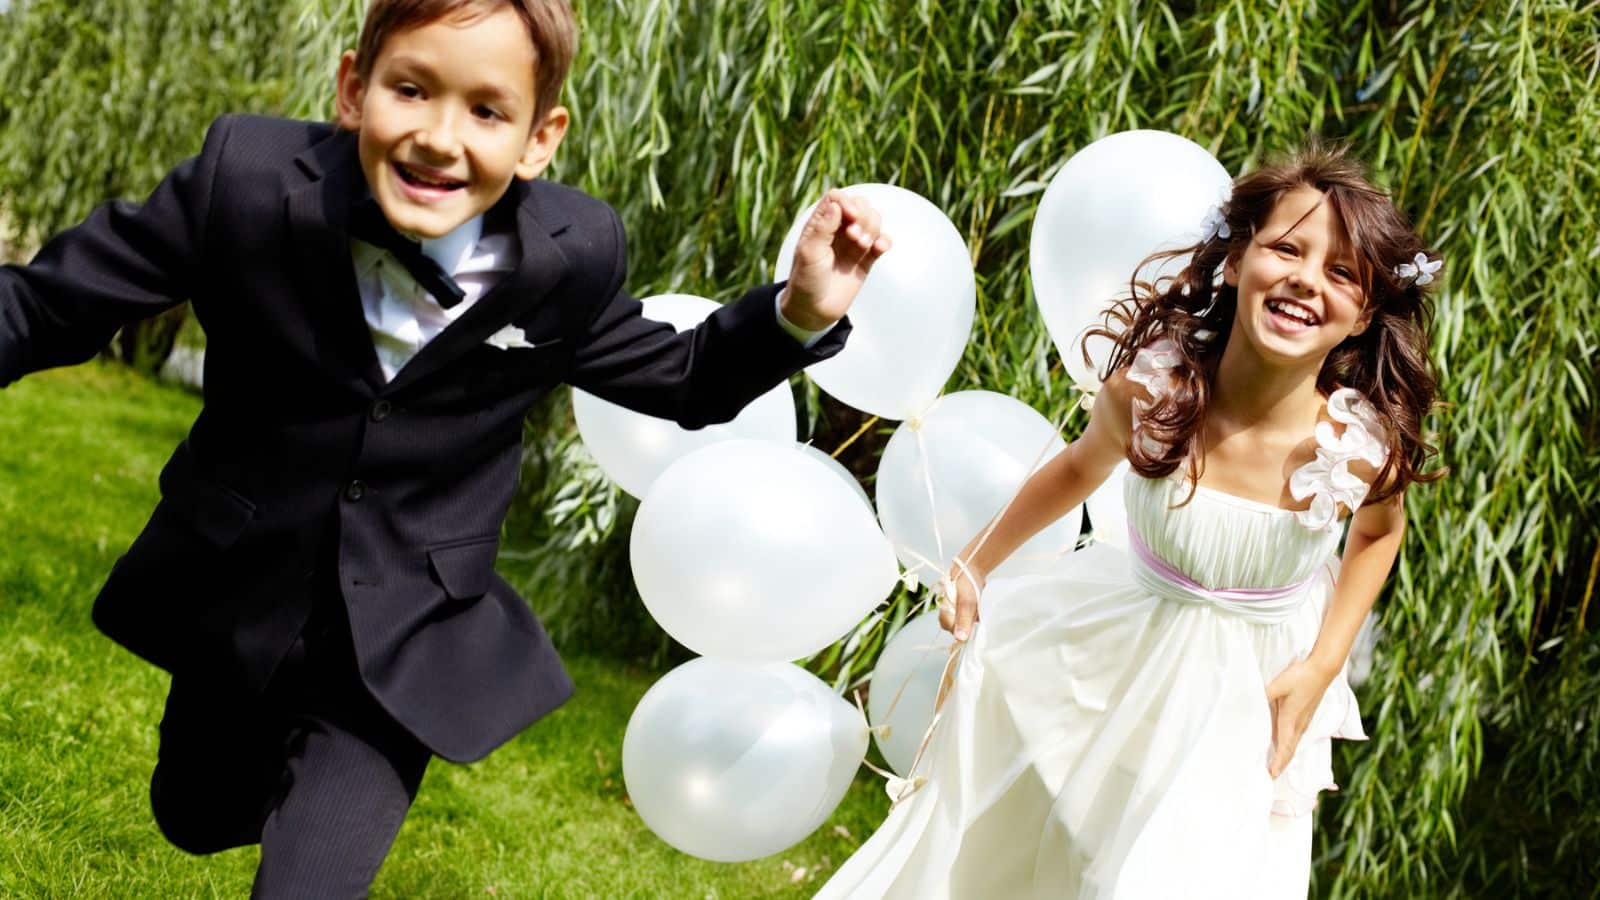 12 Rules Everyone Should Have At Their Wedding